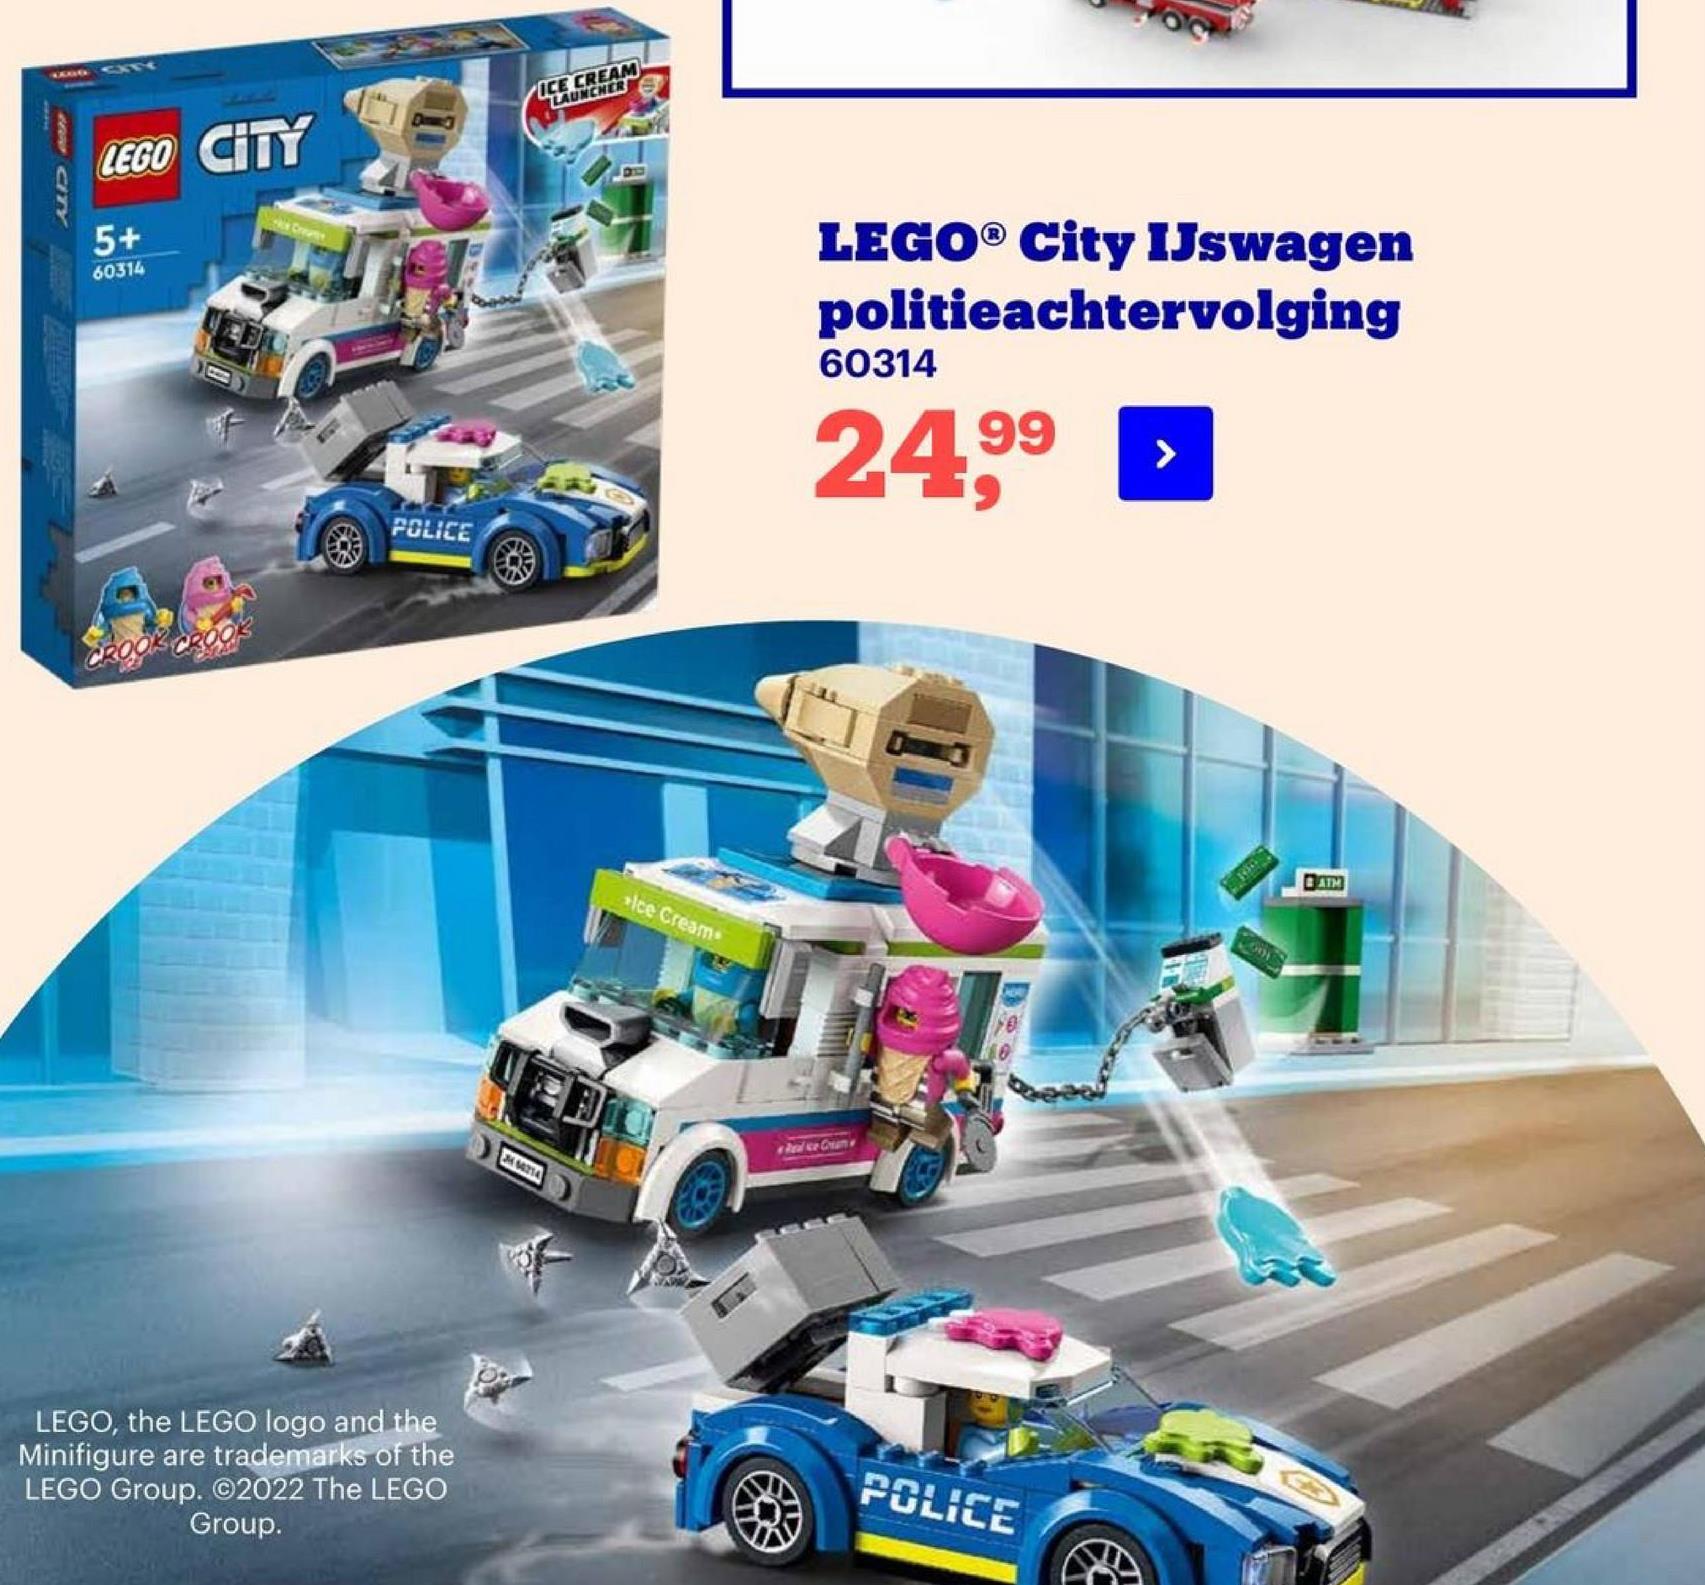 ICE CREAM
LAUNCHER
Du
LEGO CITY
W CITY
5+
60314
LEGO® City IJswagen
politieachtervolging
60314
24,99
POLICE
CROOK CROO
DAT
olce Cream
Am
TA
LEGO, the LEGO logo and the
Minifigure are trademarks of the
LEGO Group. ©2022 The LEGO
Group.
POLICE
€
